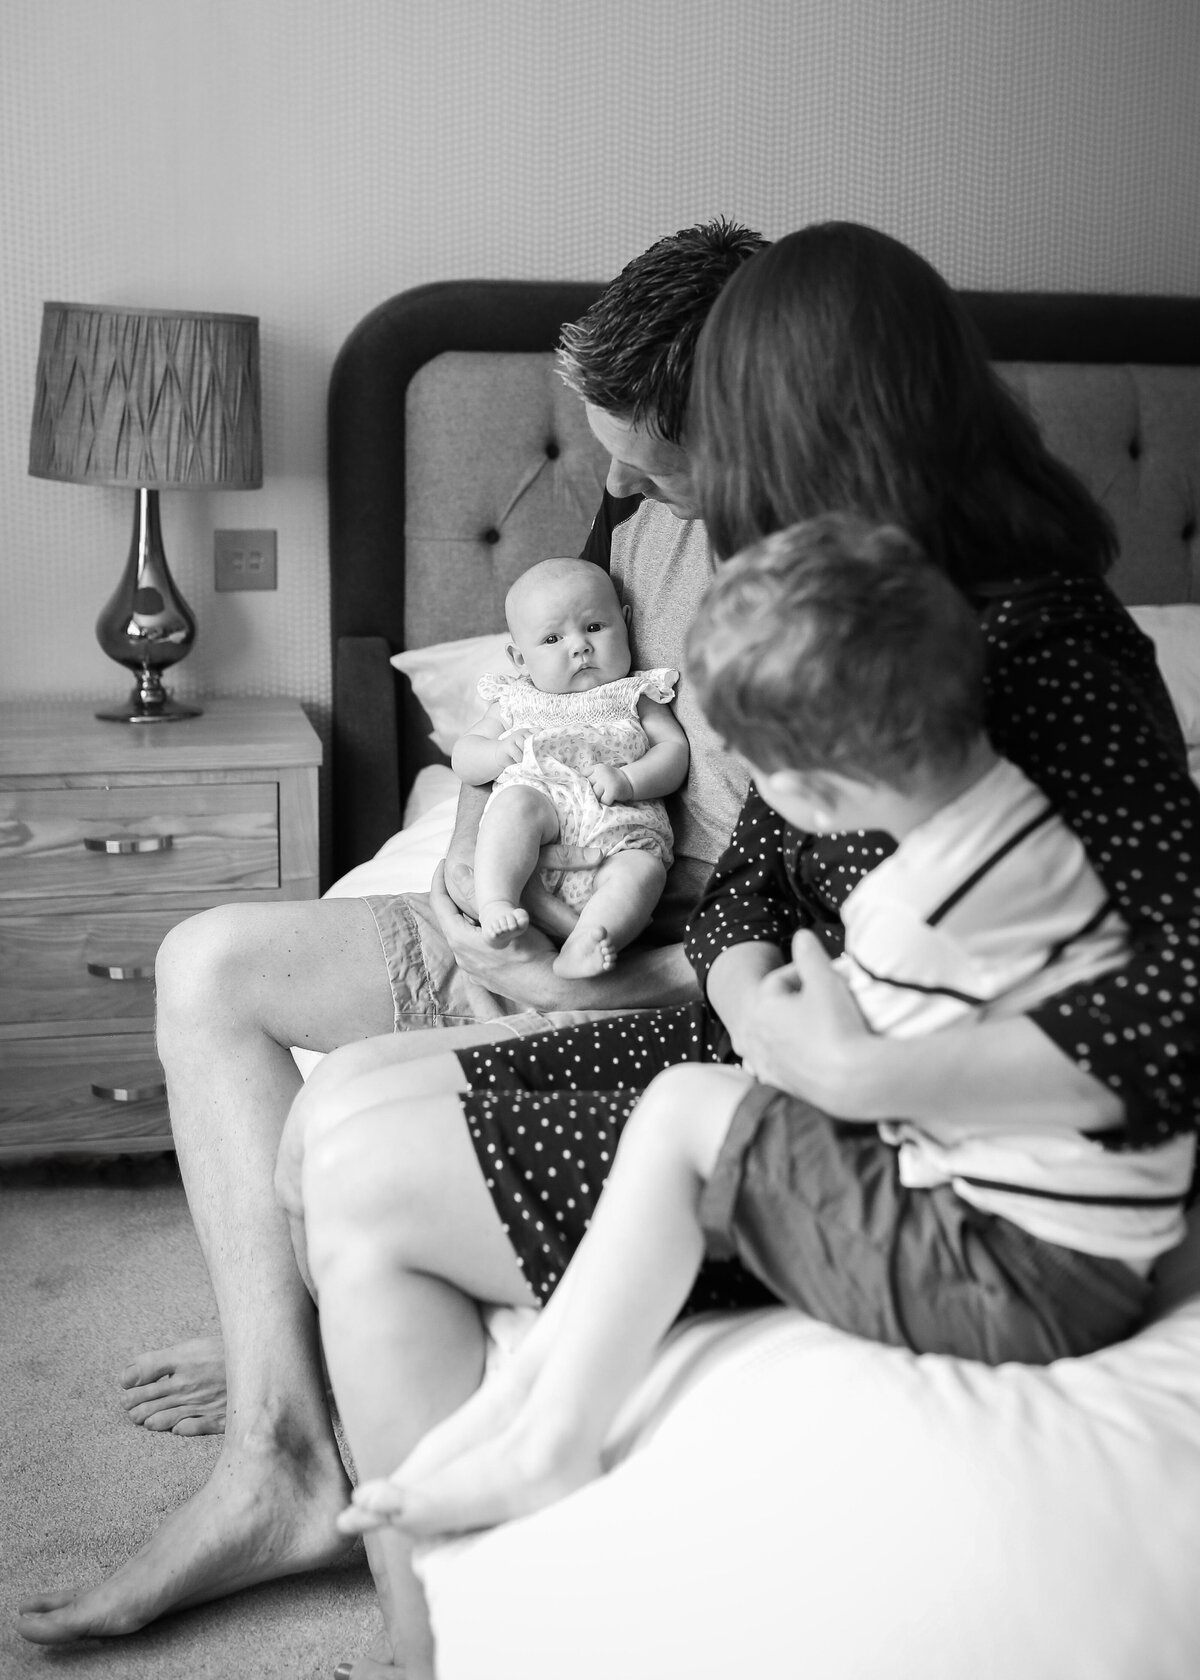 Vanessa is an experienced local photographer specialising in babies and newborns.